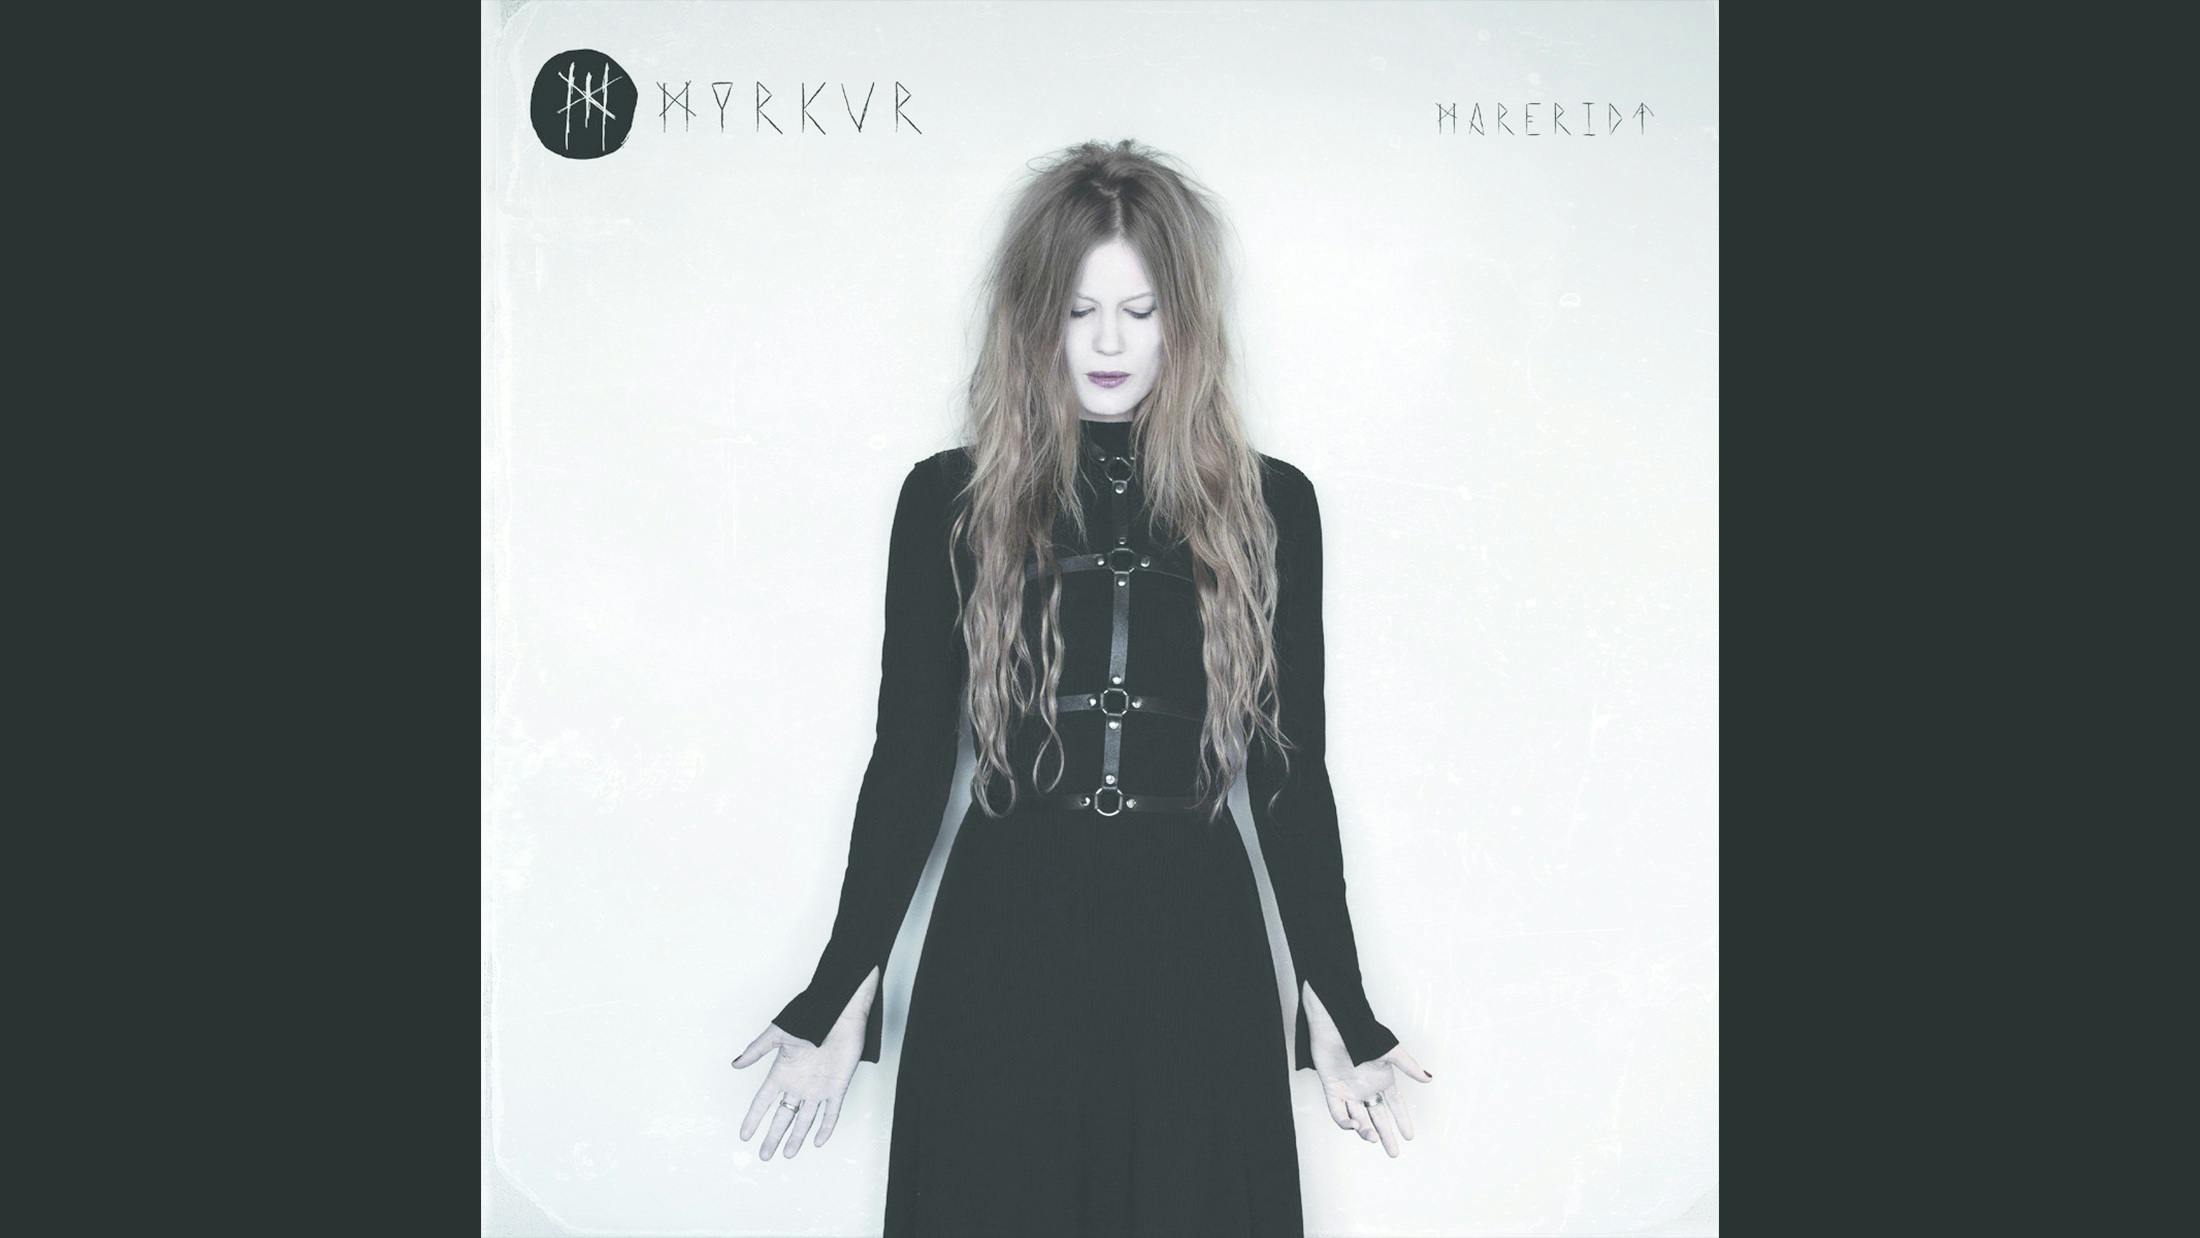 Horror and beauty, turmoil and peace; Mareridt was a work of contrasts. While 2015’s M debut set Myrkur up as the queen of black metal, this follow-up delved further into the haunting folk and gothic mood of Amalie Brunn’s native Denmark. Inspired, in part, by Amalie documenting the nightmares she was suffering, this was a creepy, powerful return.